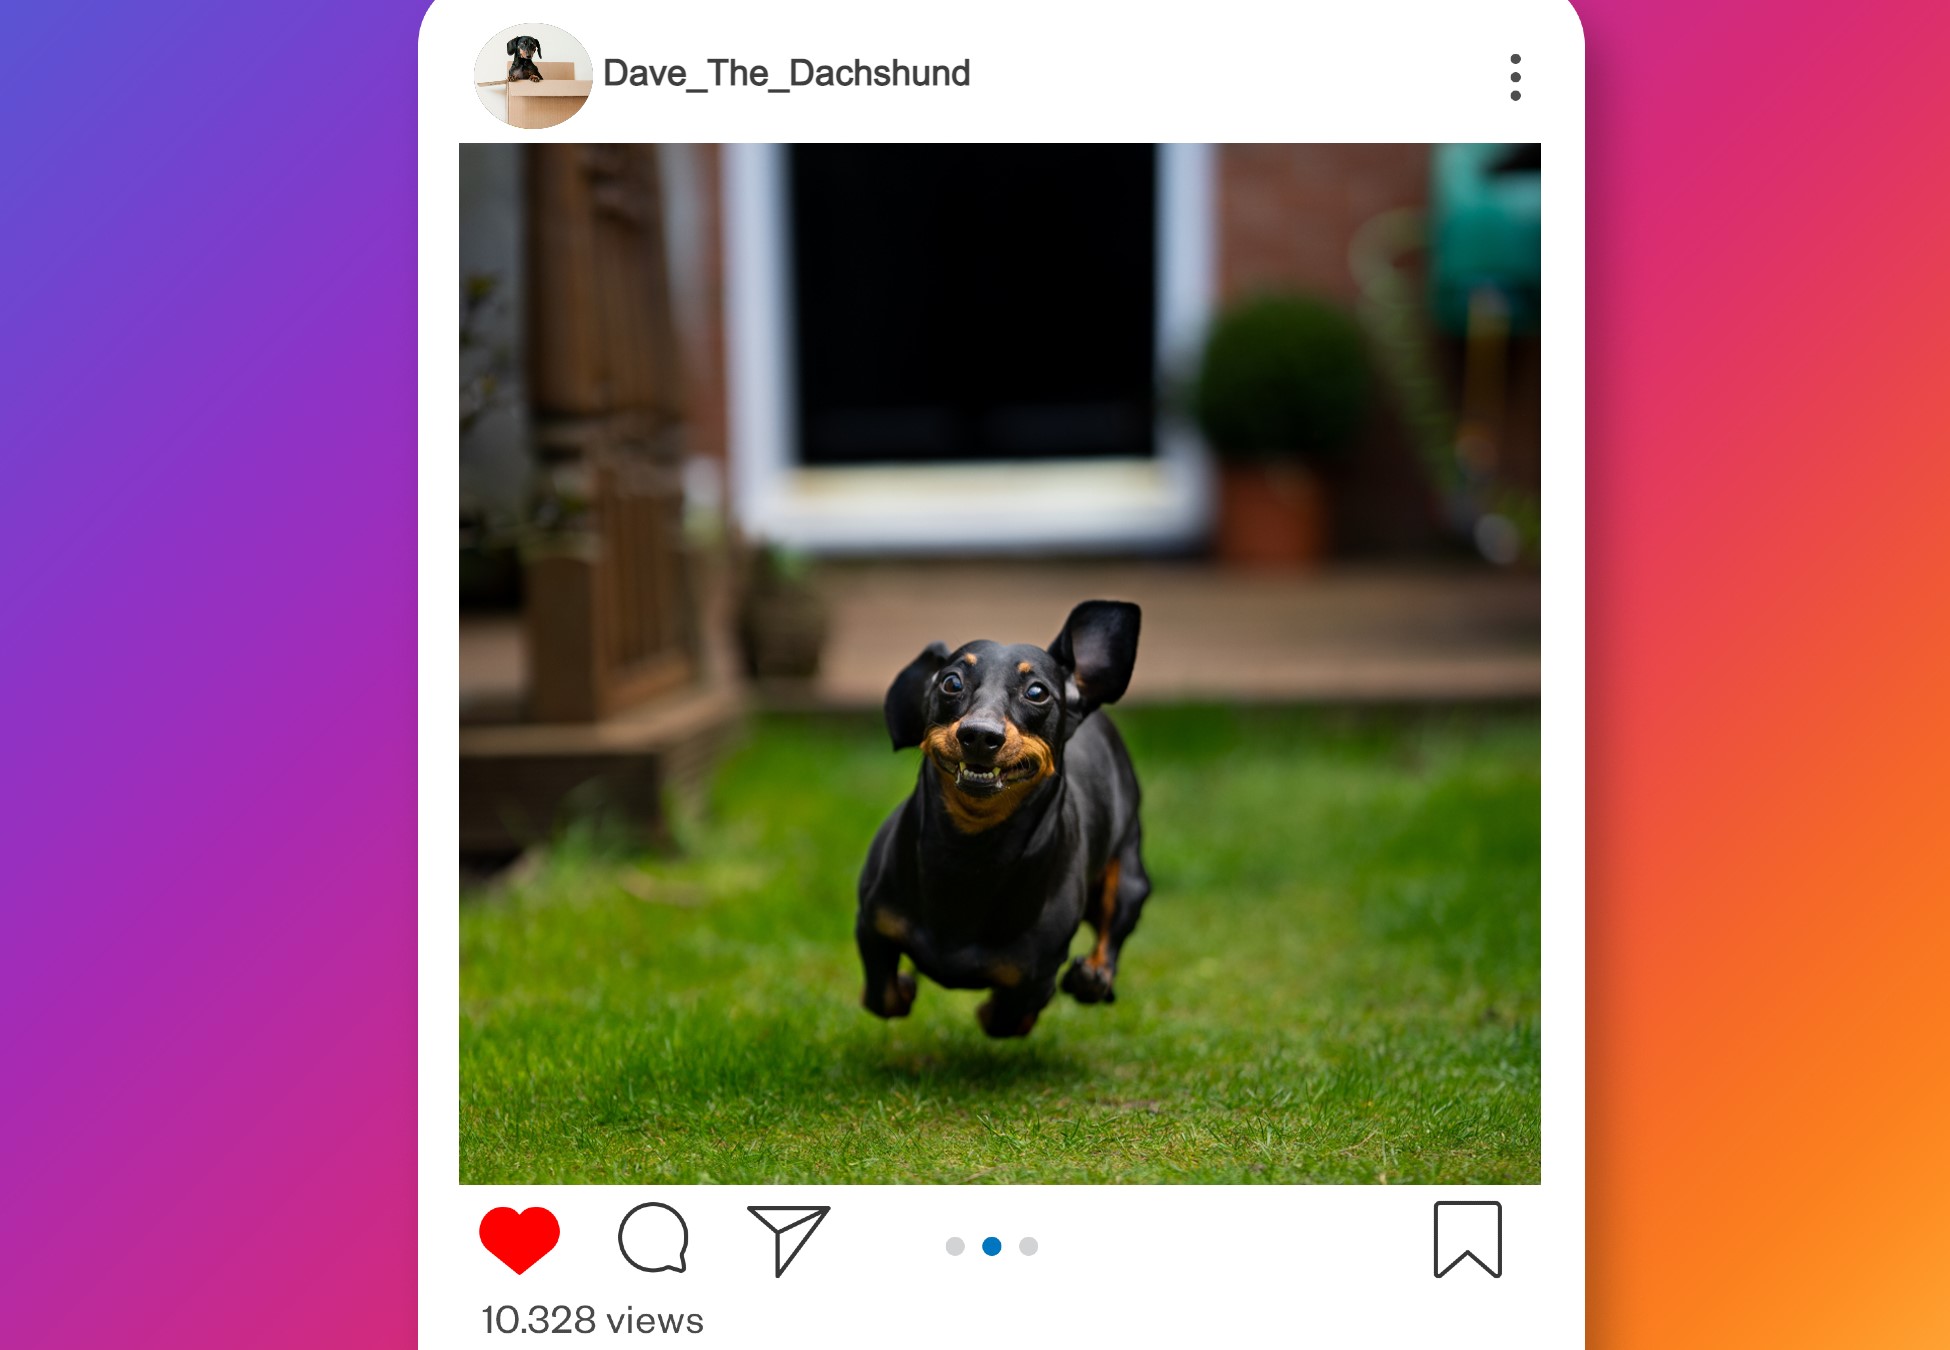 A picture of a dog from an Instagram account.